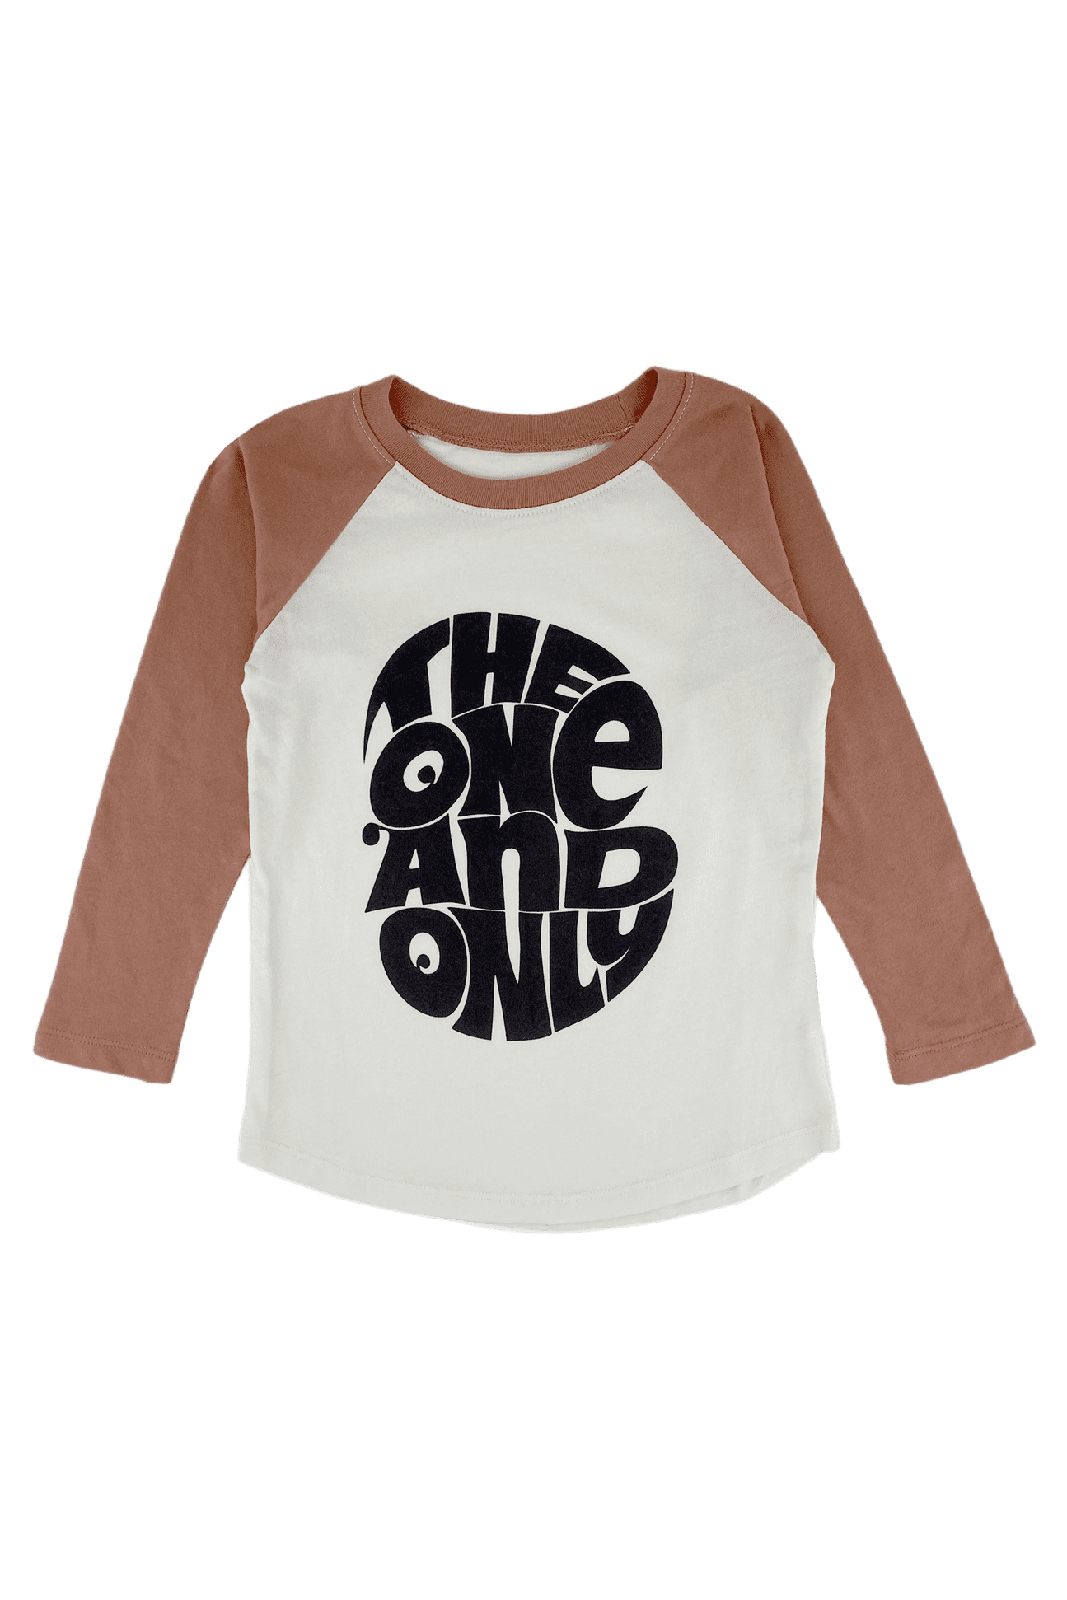 'The One and Only' Raglan Tee Tea for Three: A Children's Boutique